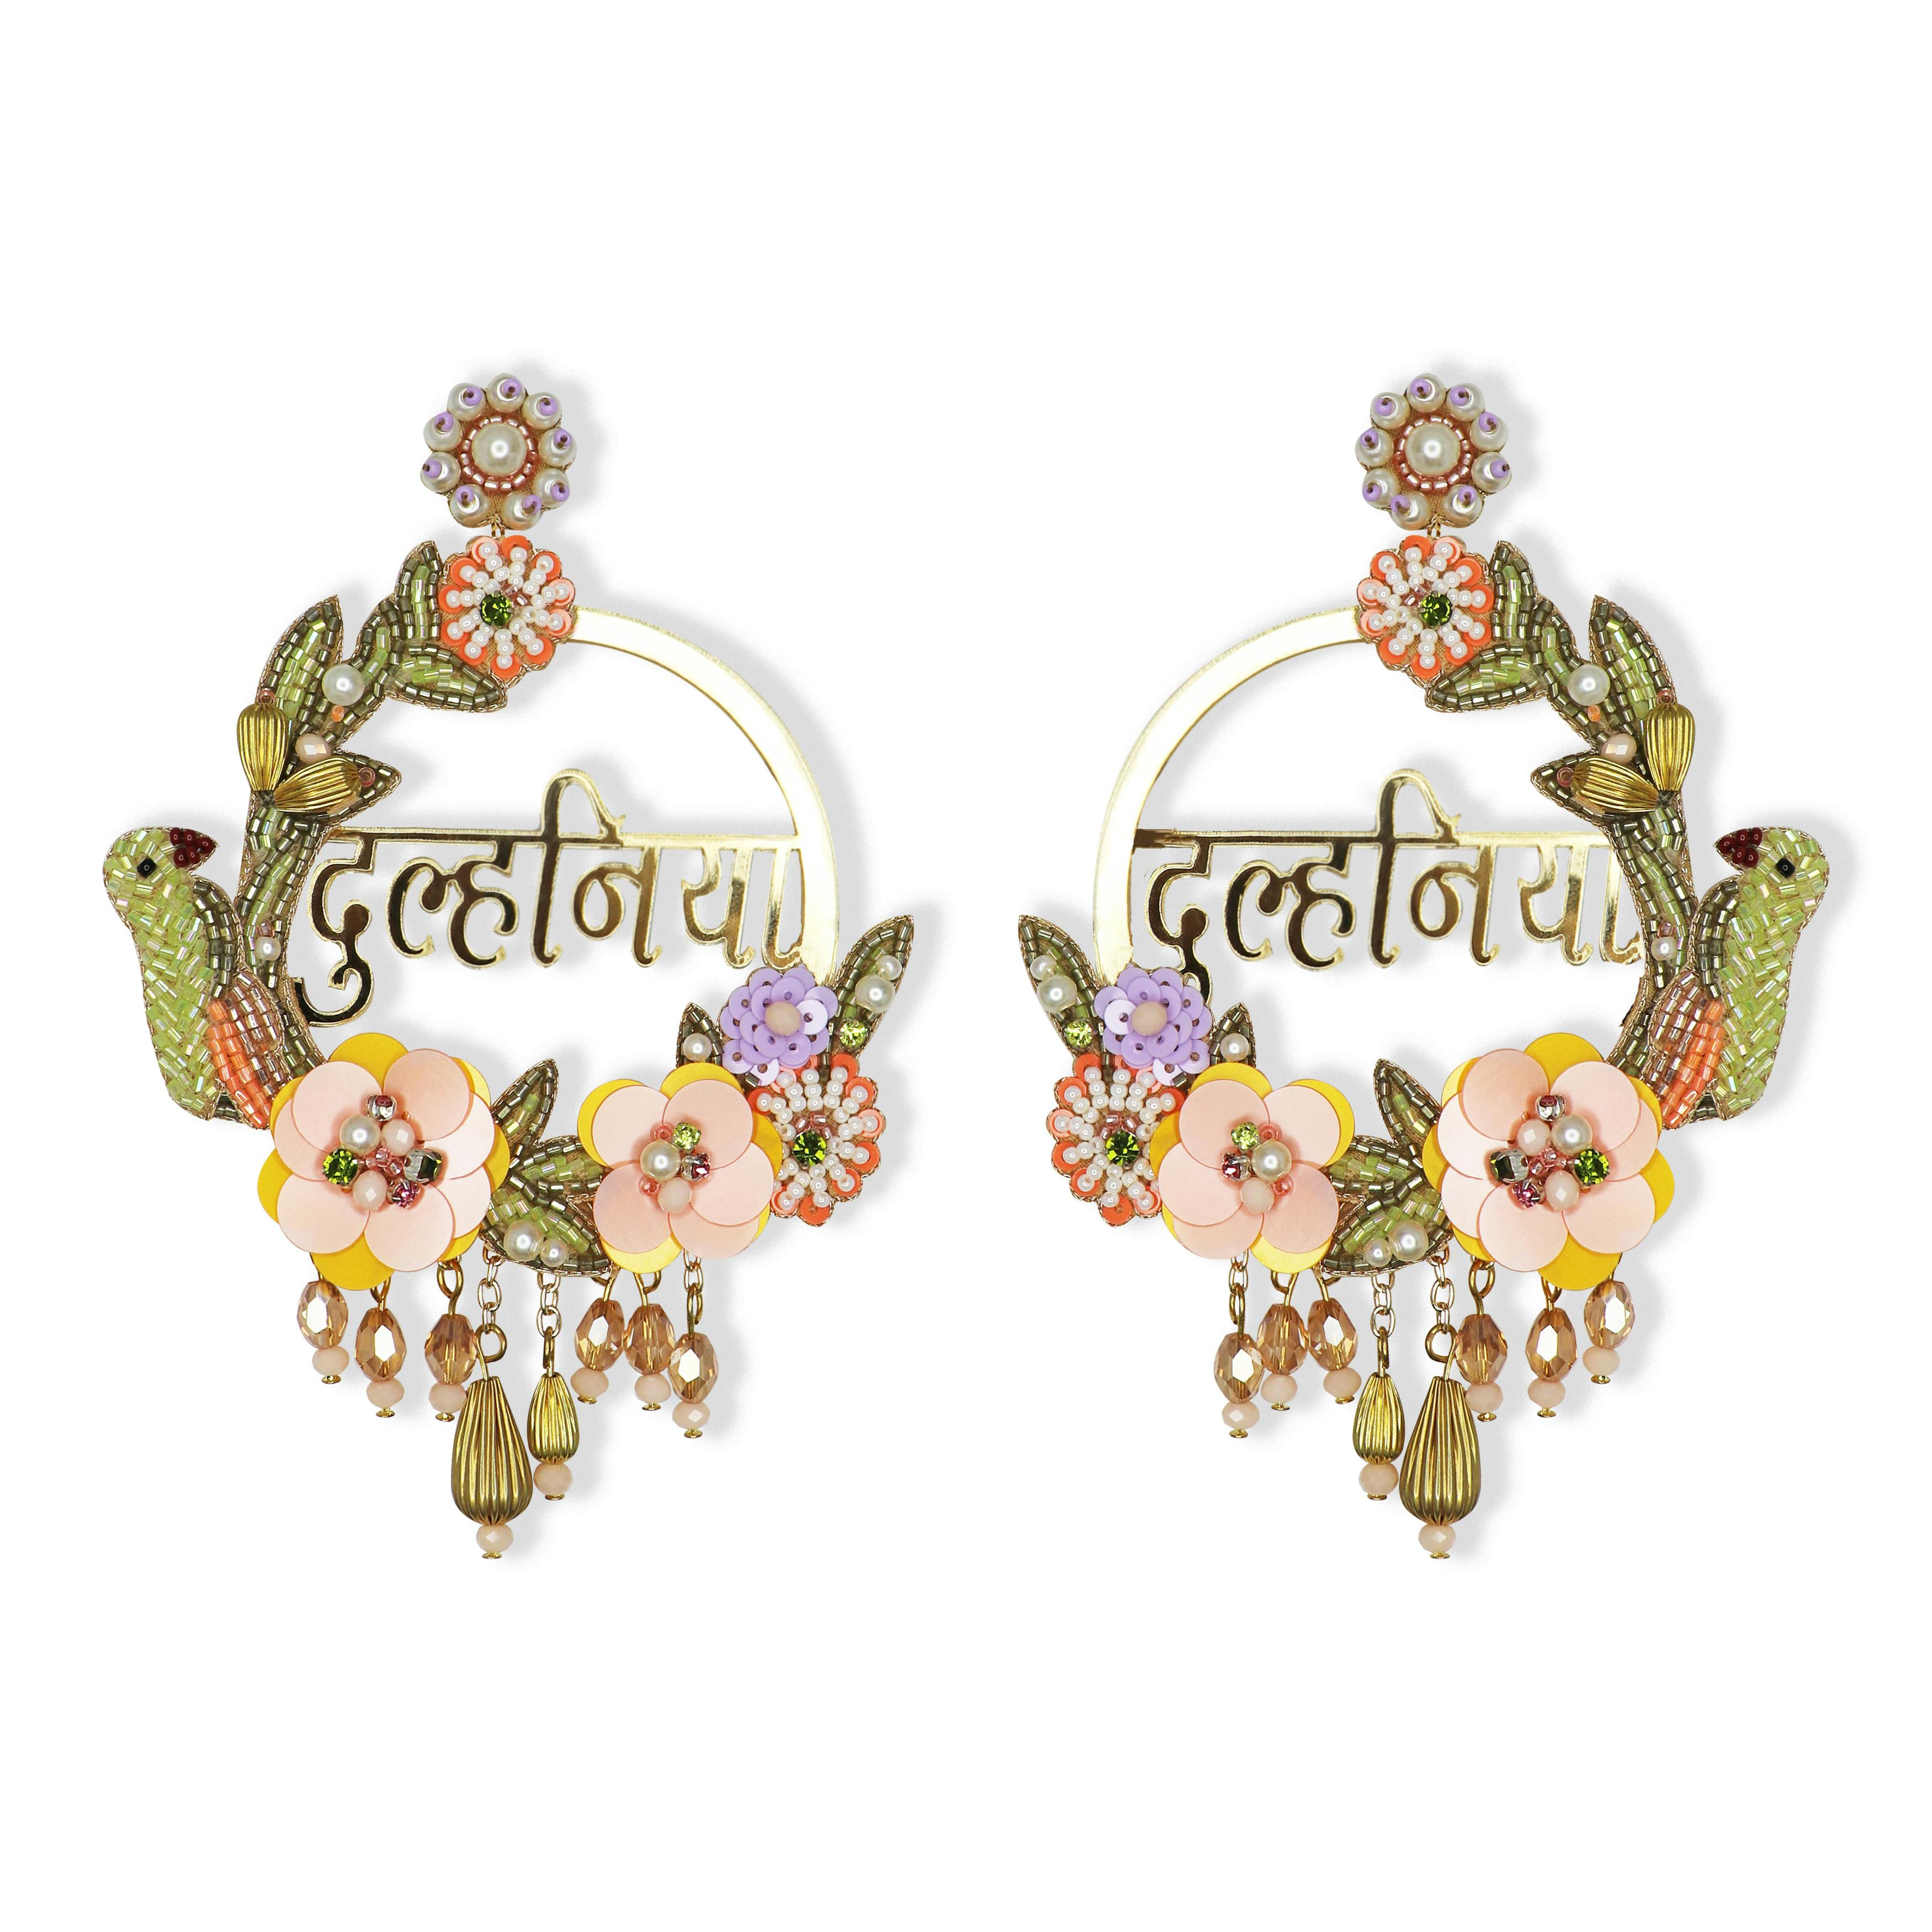 Dulhaniya Earrings, a product by Label Pooja Rohra